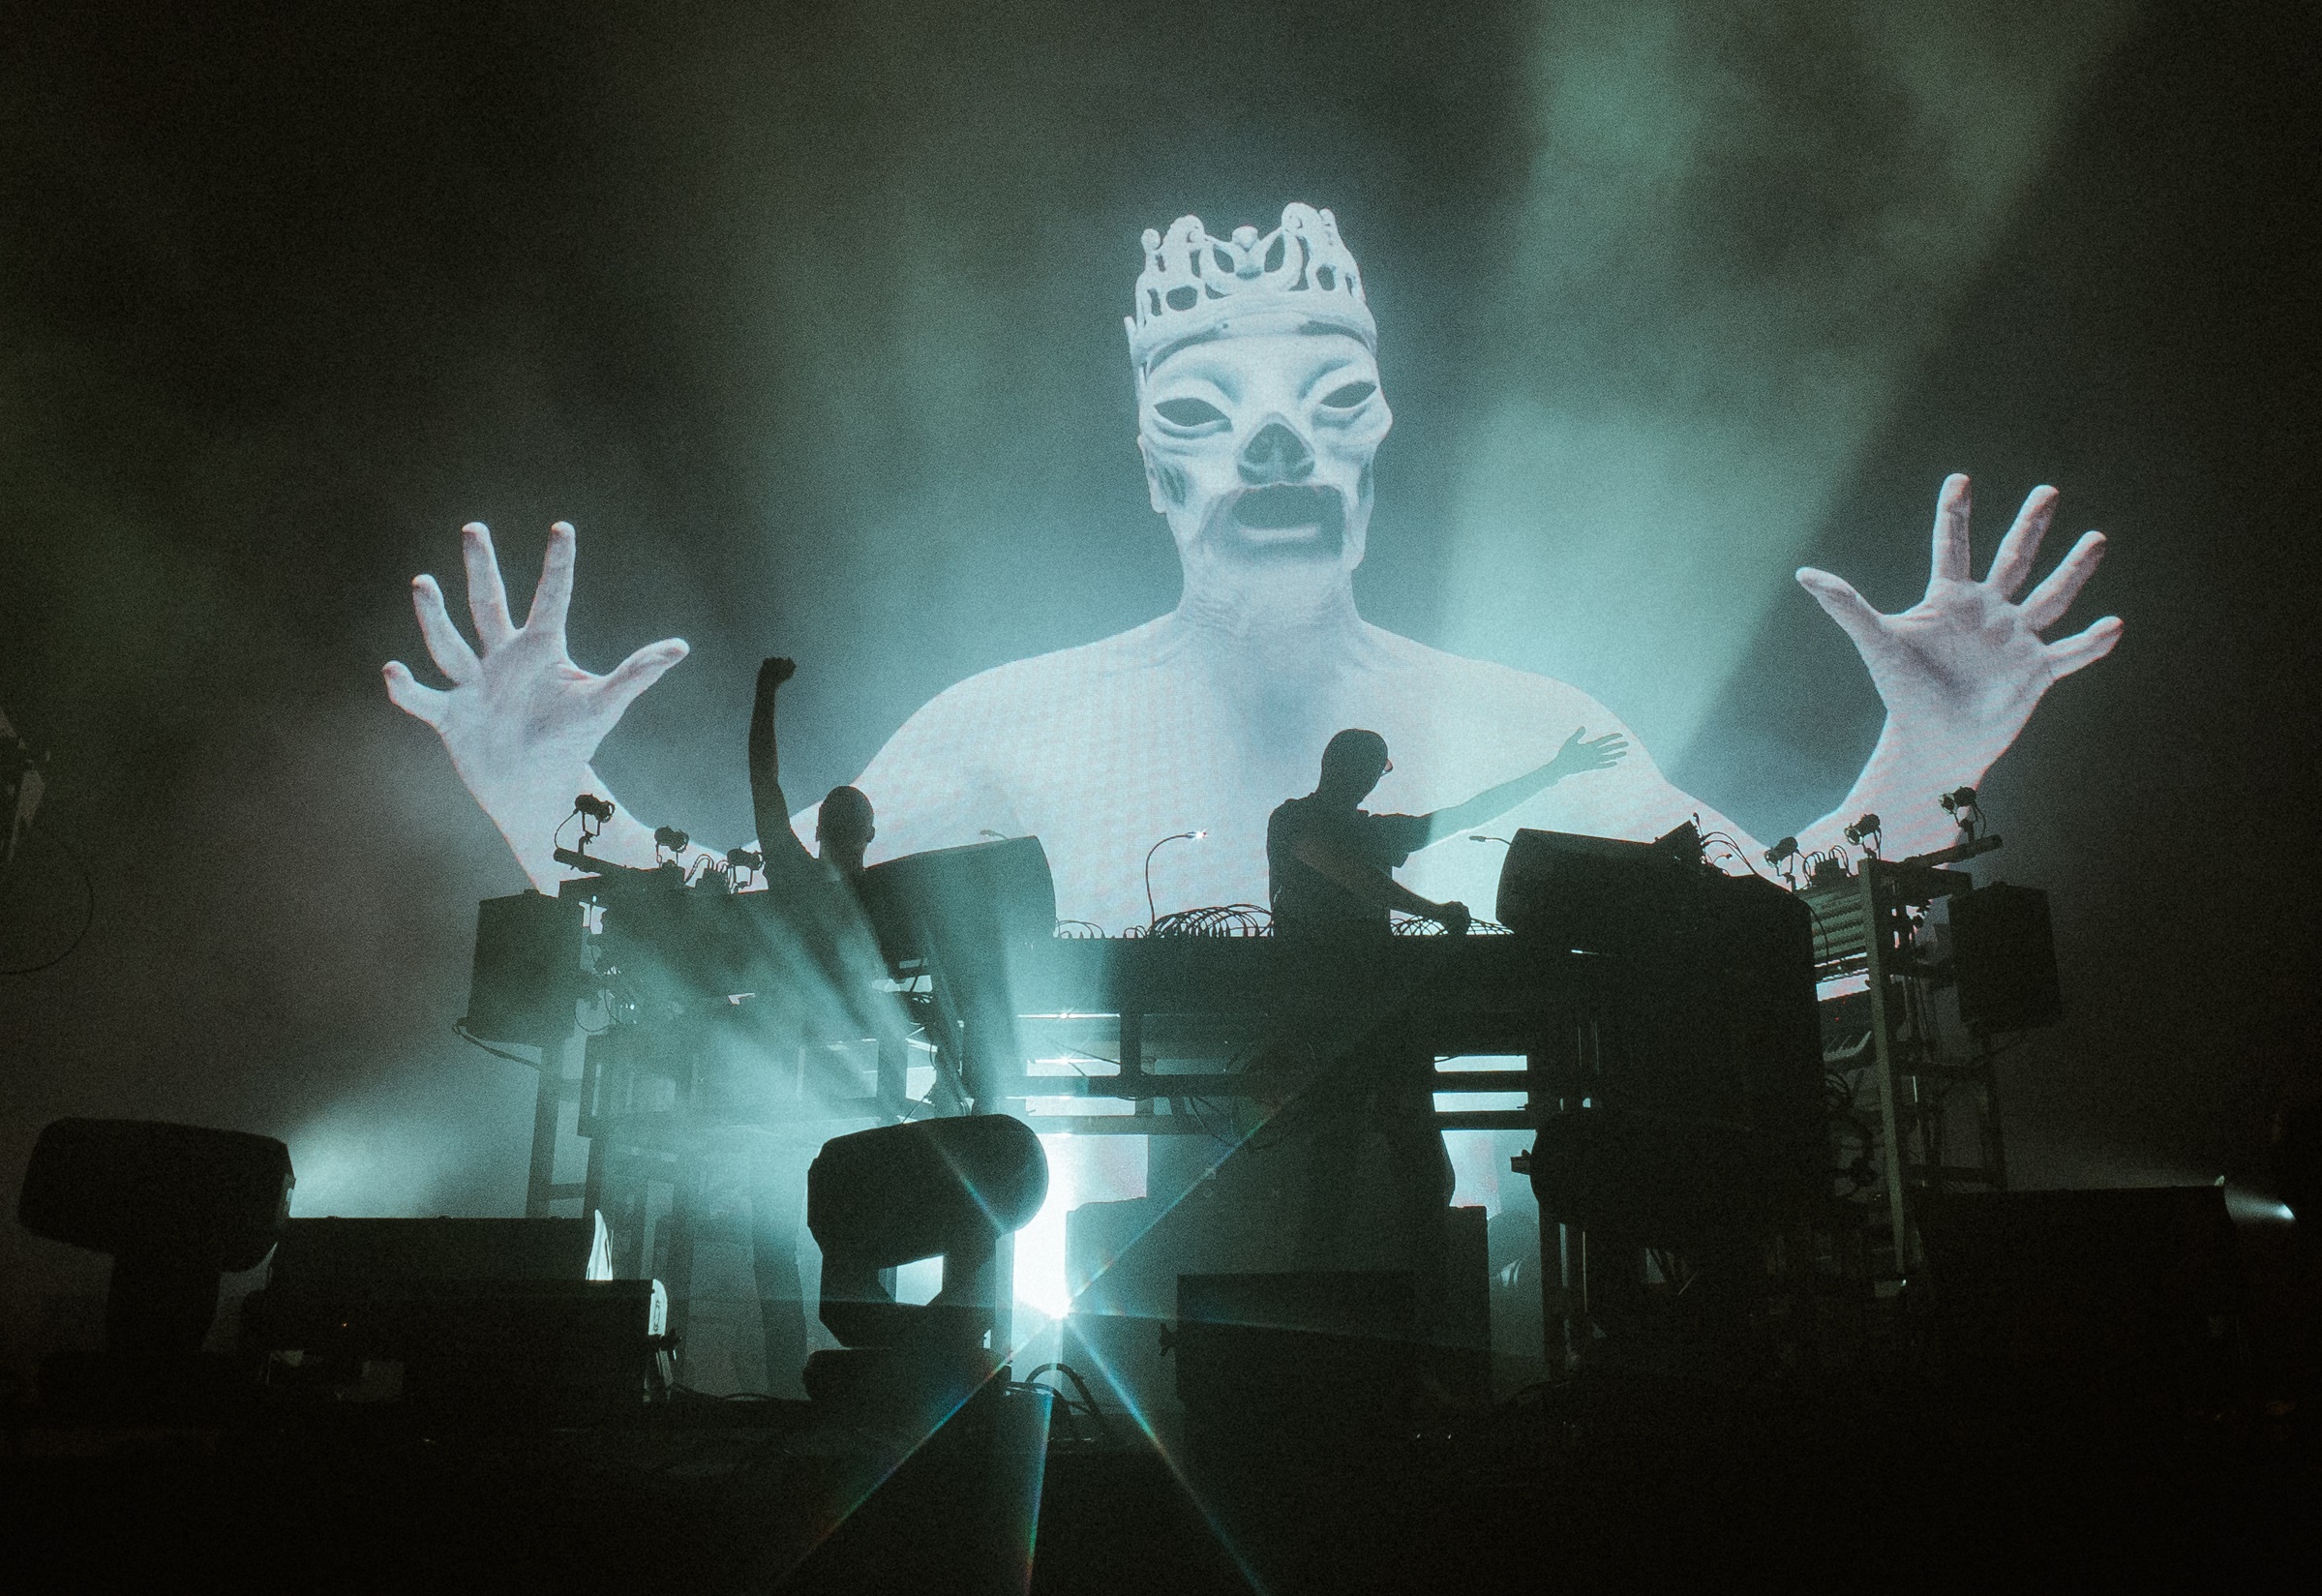 The Chemical Brothers release new single “No Reason” with mind-bending music video